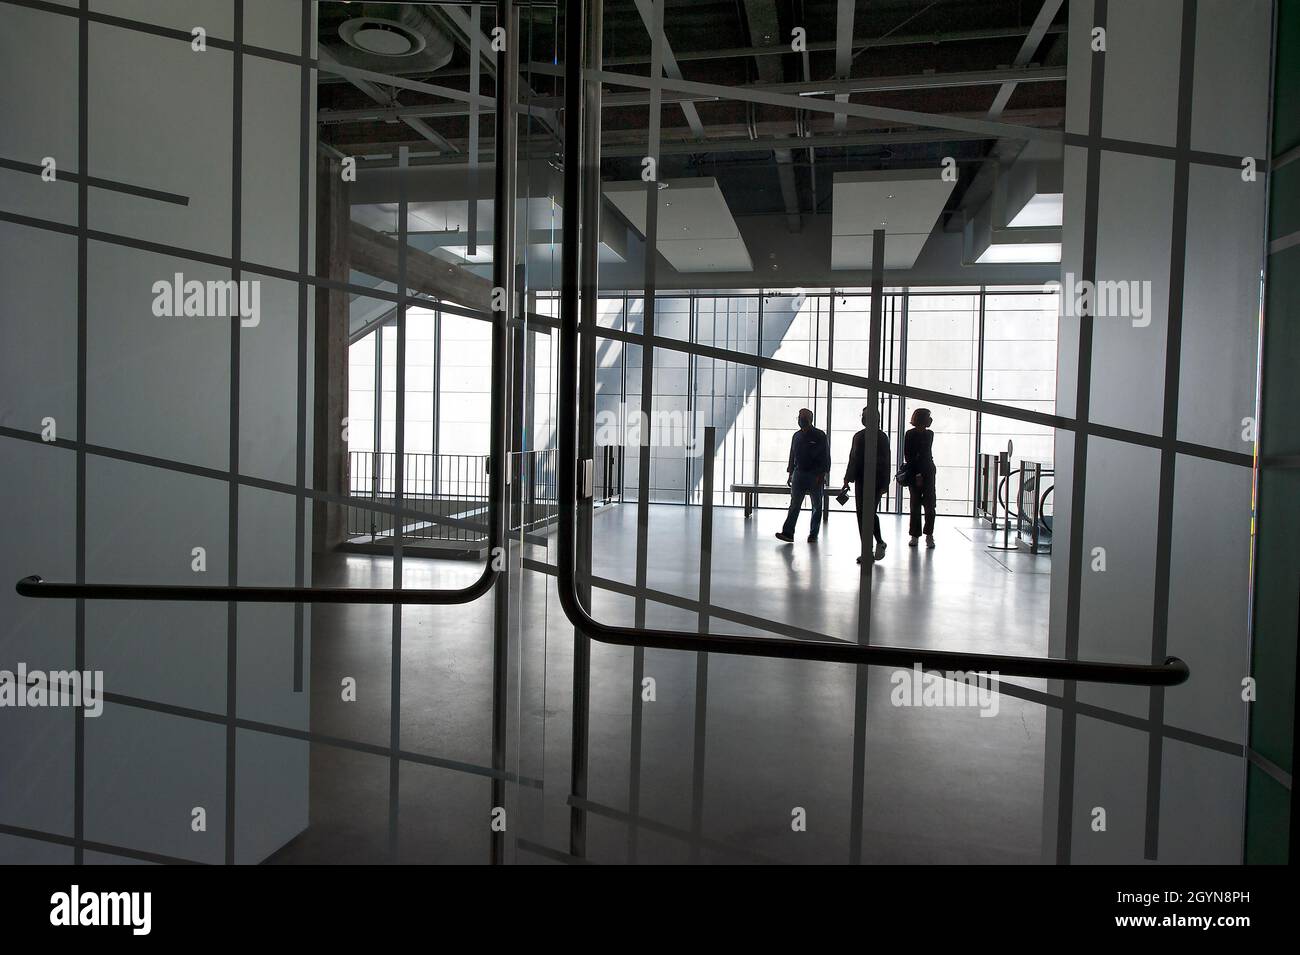 Interior architecture of the Academy Museum of Motion Pictures seen through a glass door to an exhibit designed by architect Renzo Piano. Stock Photo